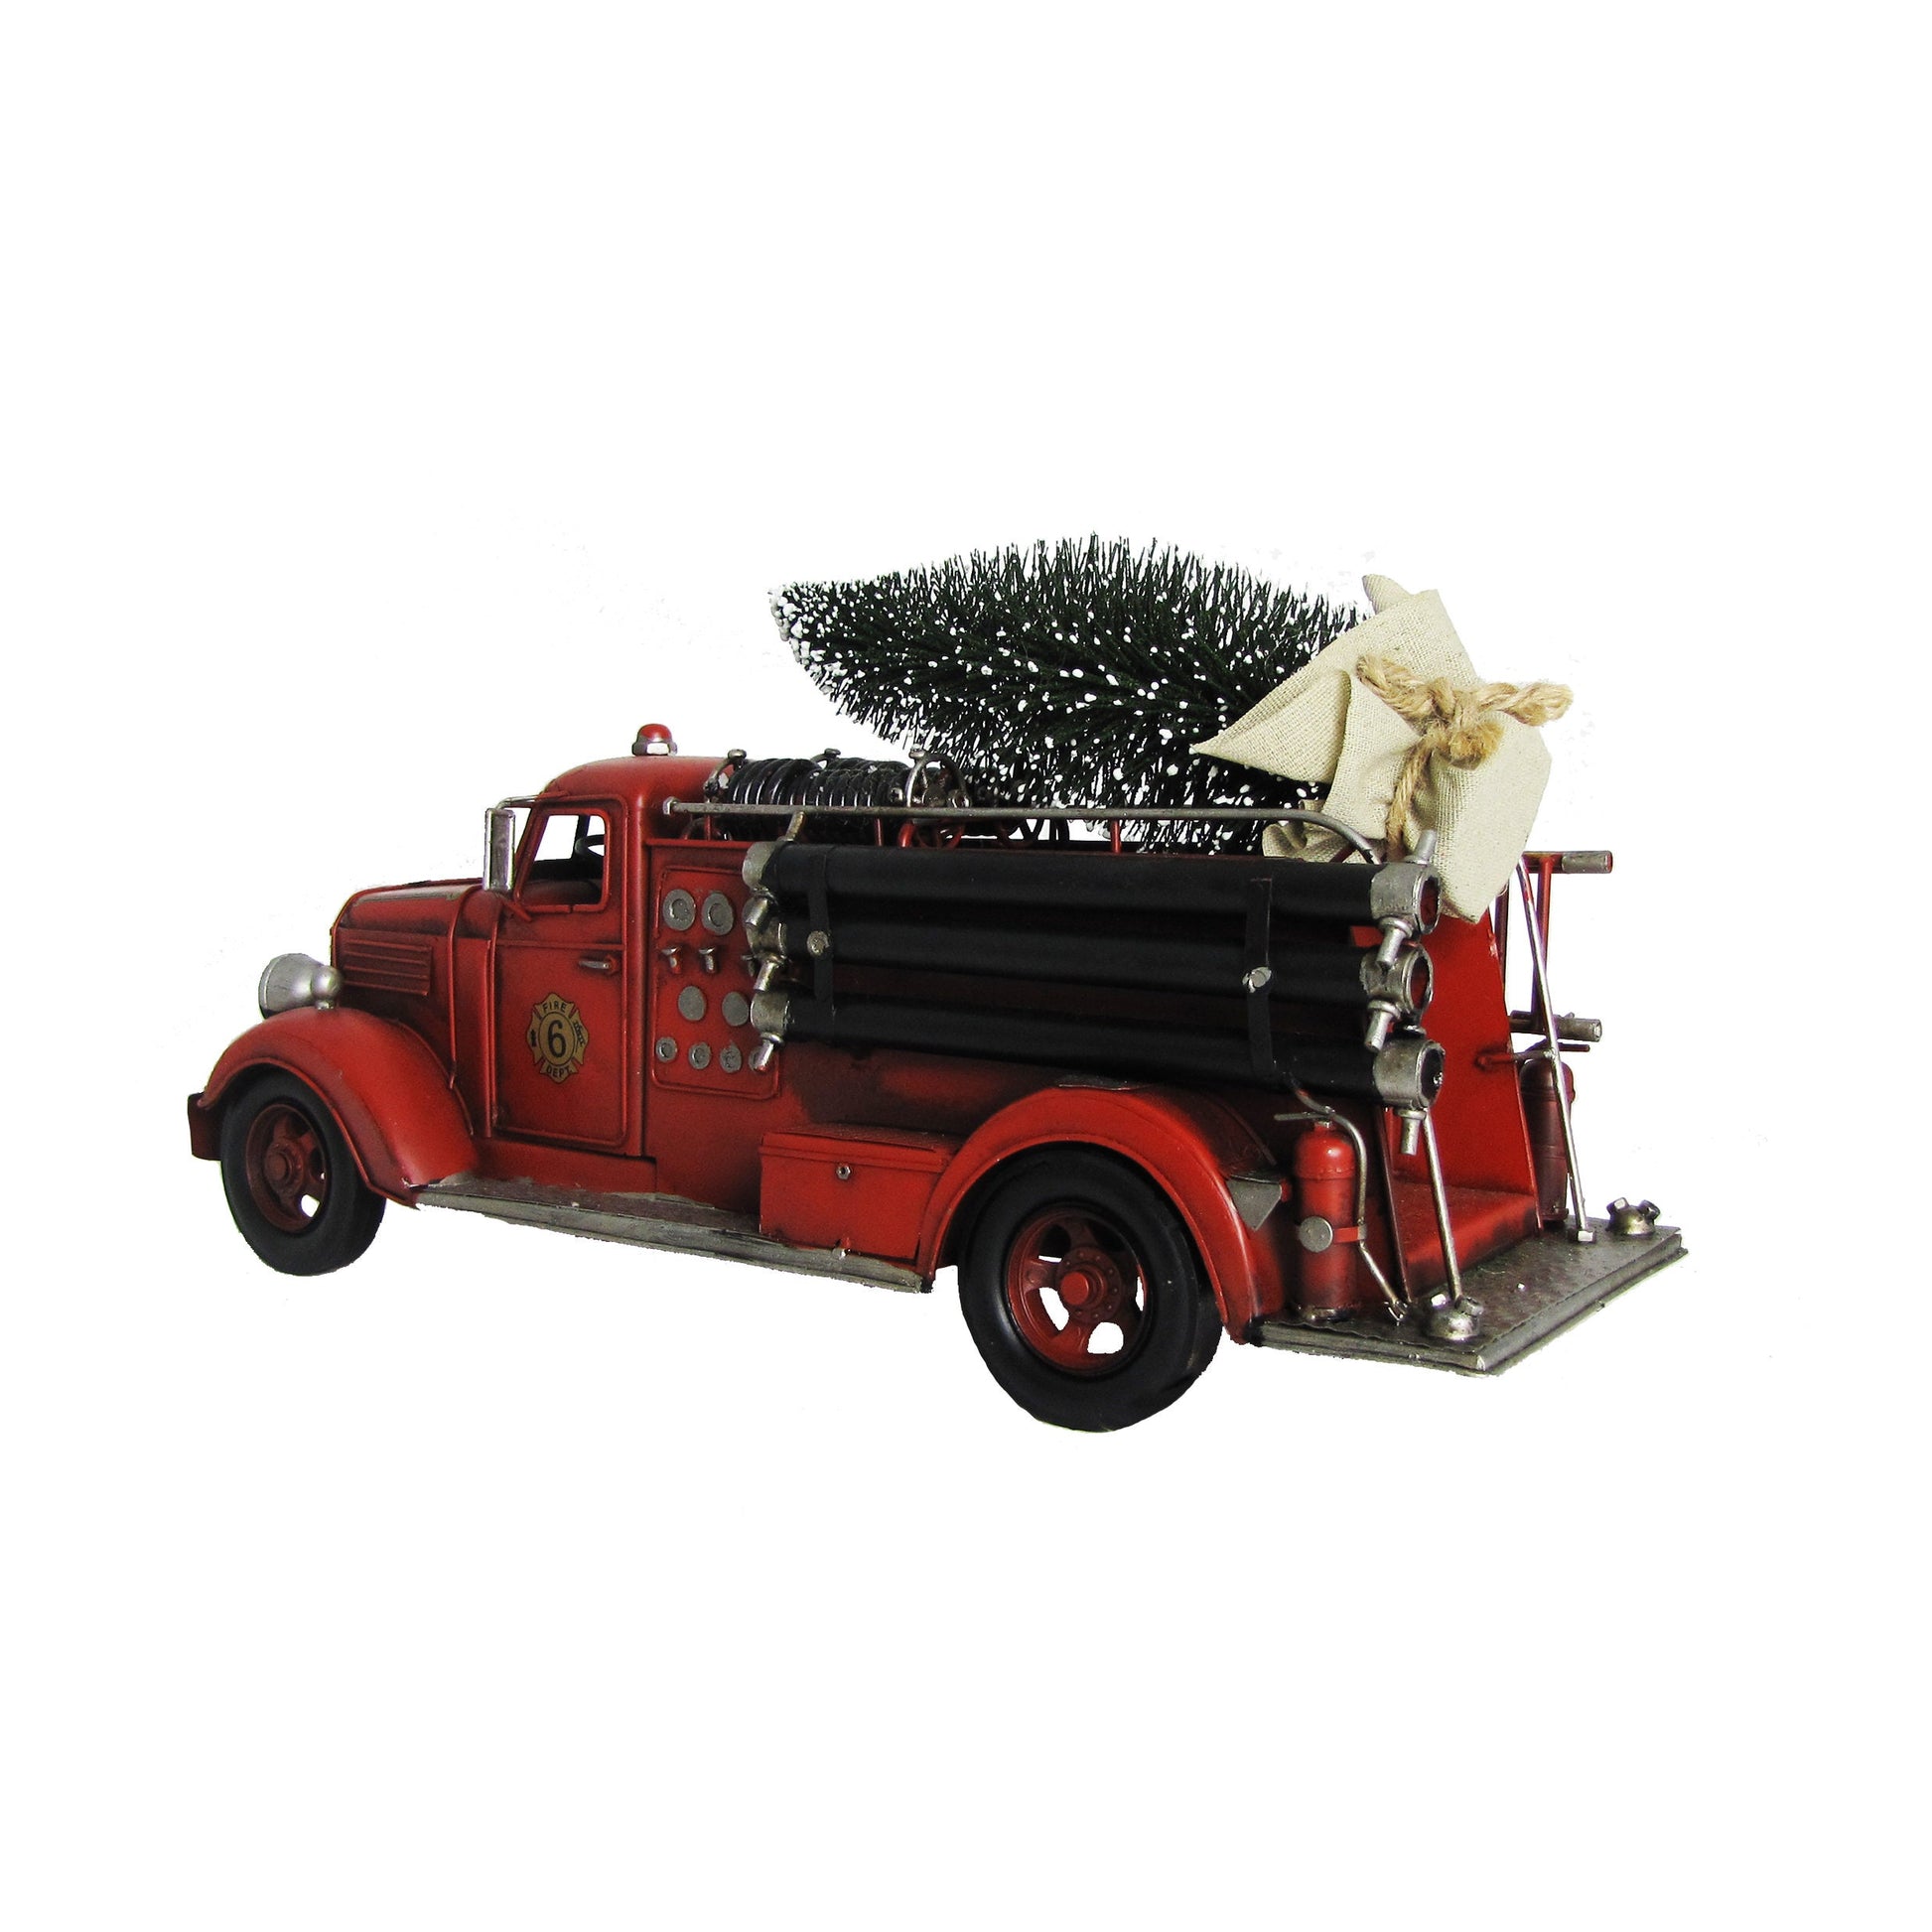 1940's Vintage Style Fire Truck with Christmas Tree